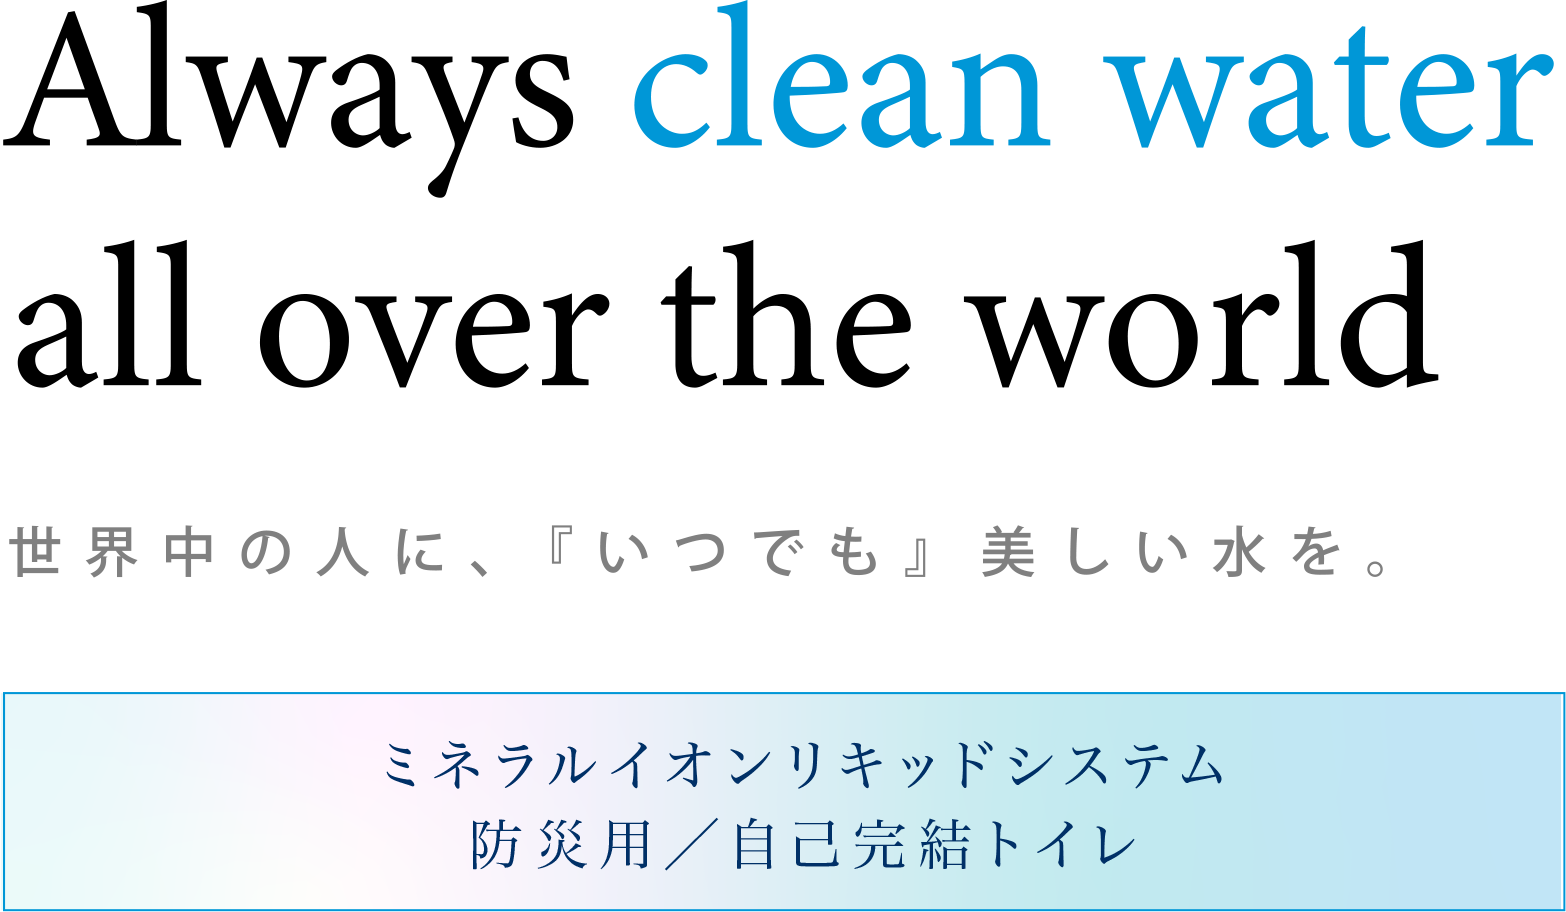 Always clean water all over the world. 世界中の人に、『いつでも』美しい水を。